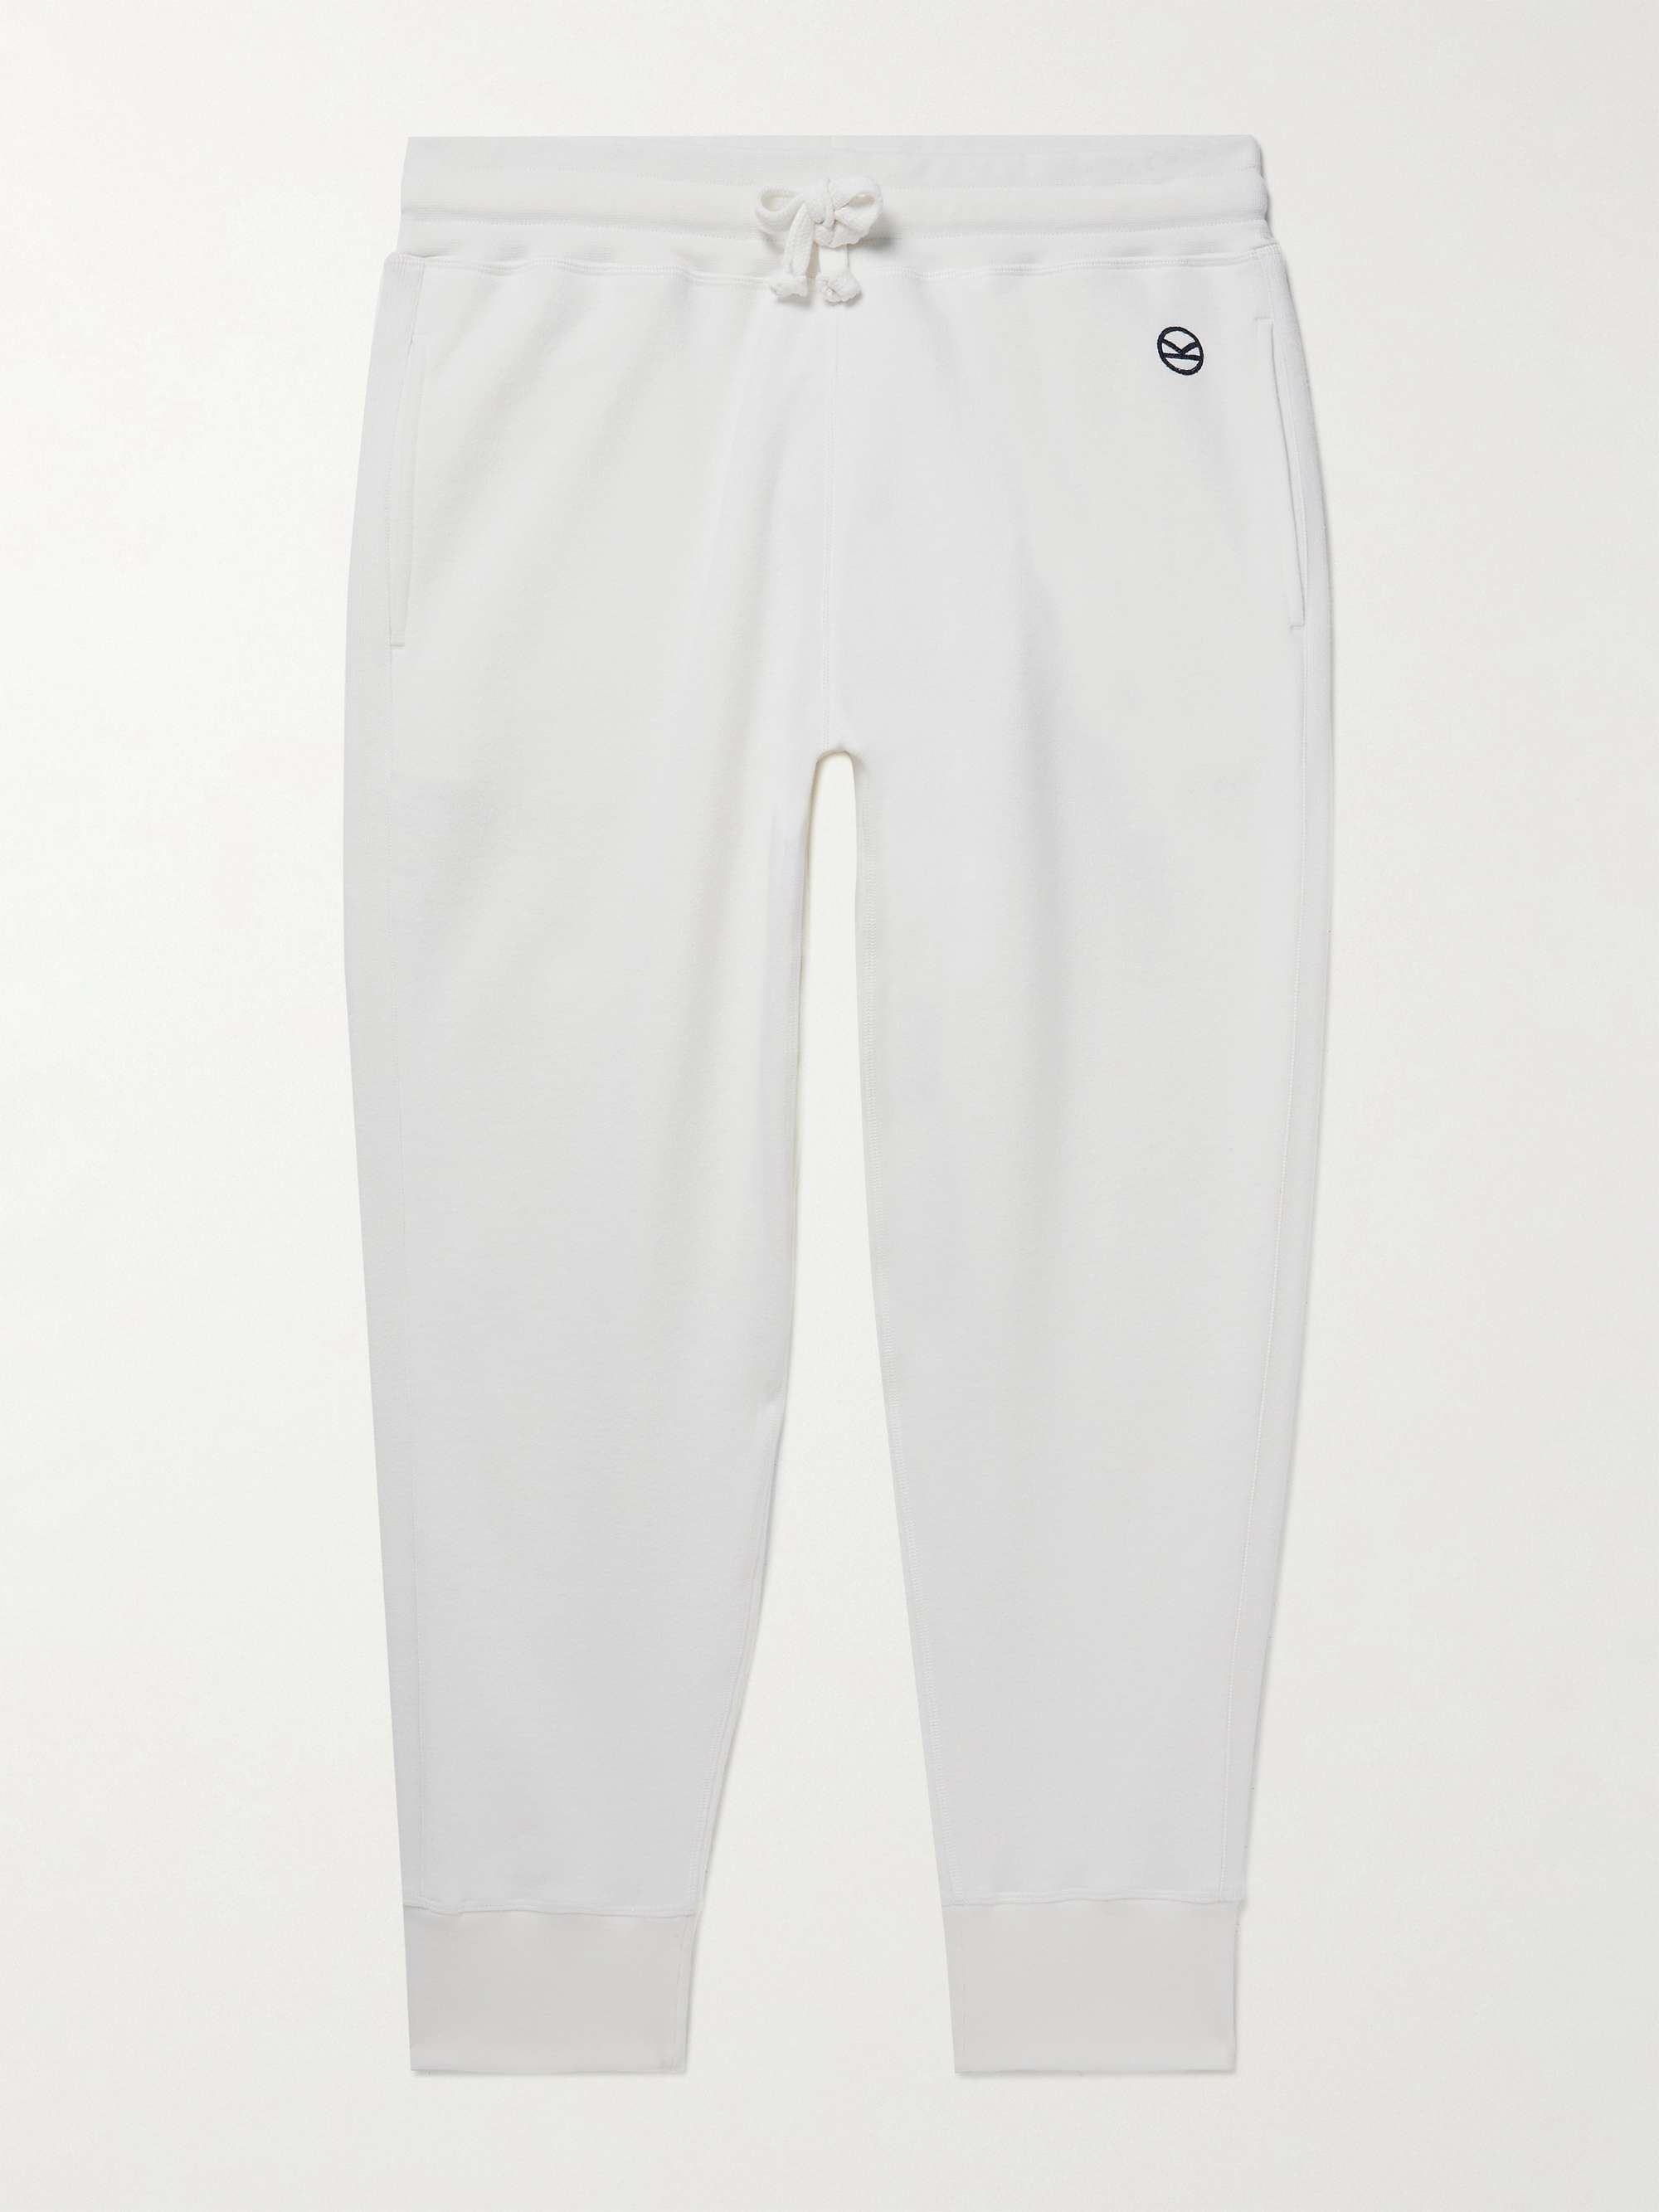 KINGSMAN Slim-Fit Tapered Logo-Embroidered Cotton-Jersey Sweatpants